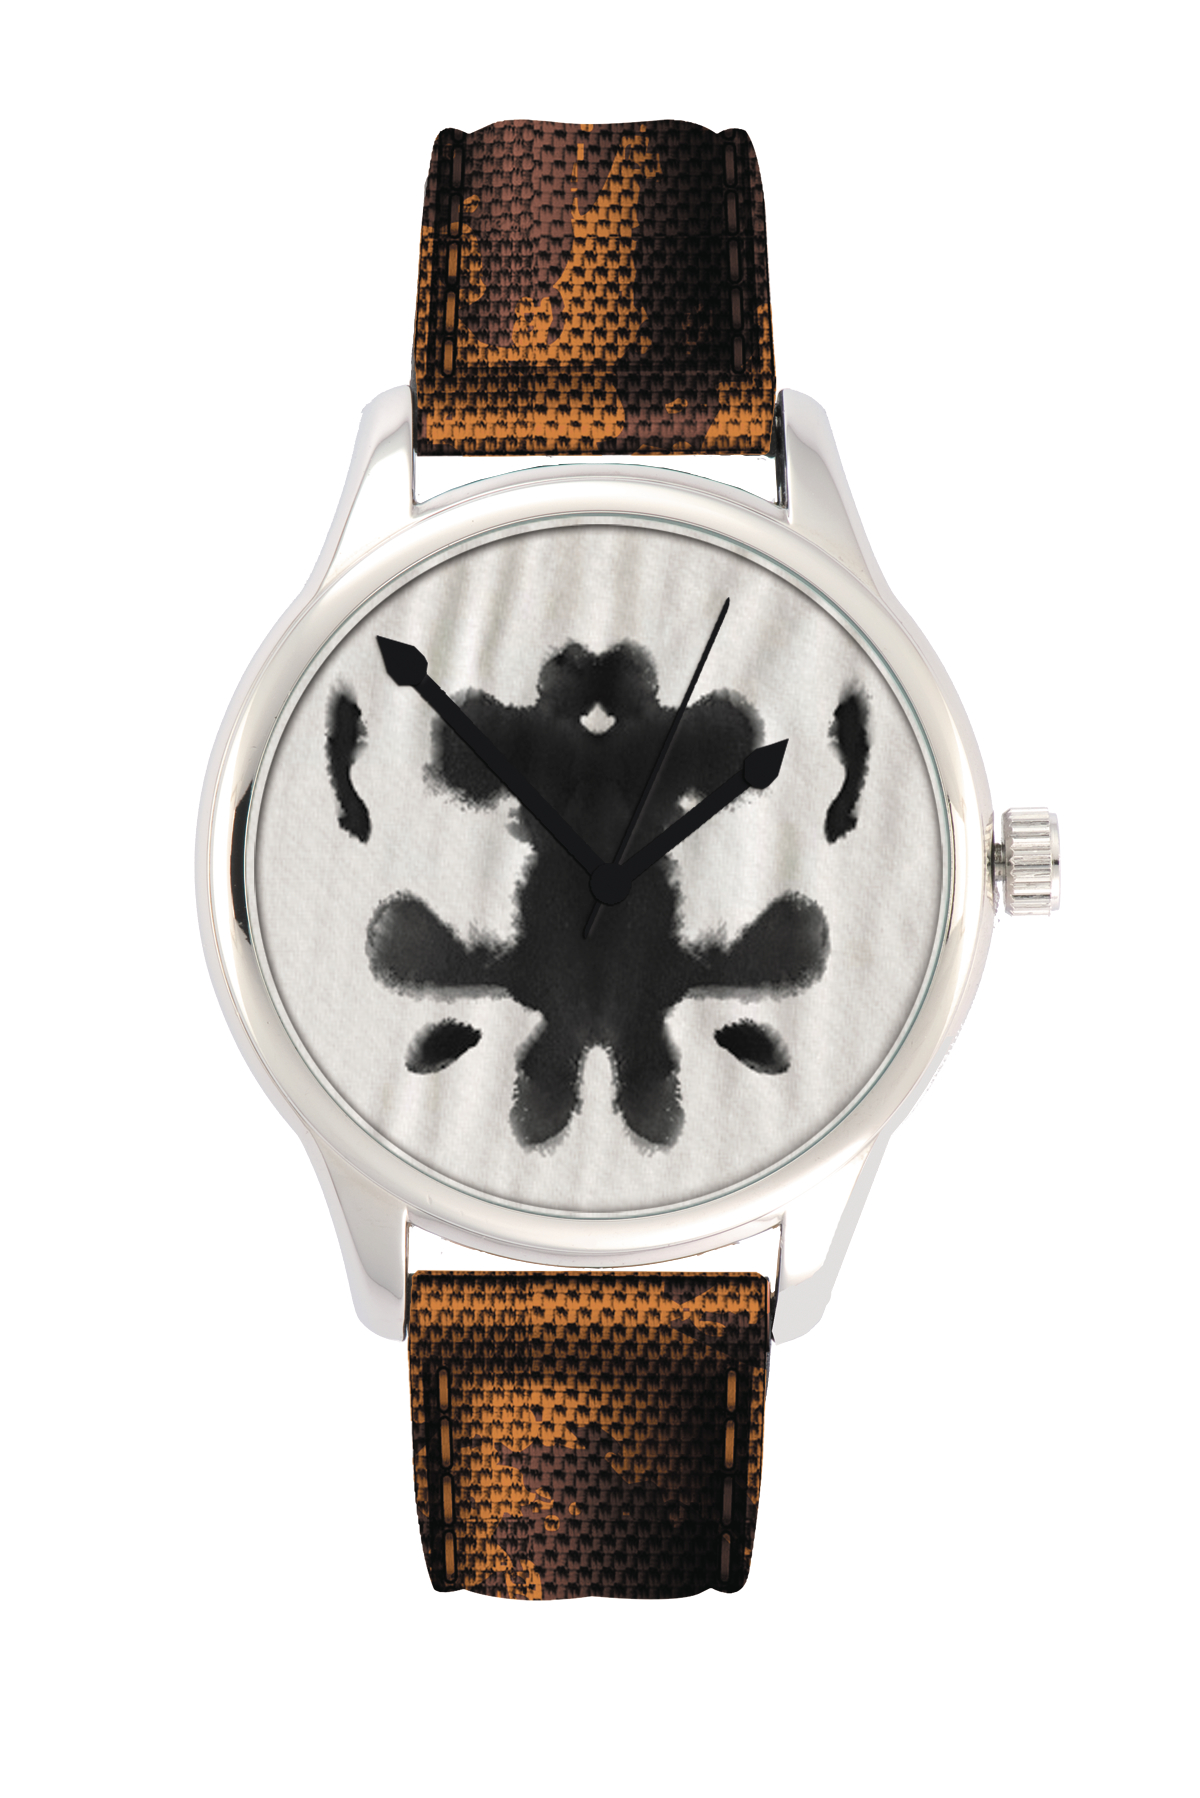 DC WATCH COLLECTION #14 RORSCHACH